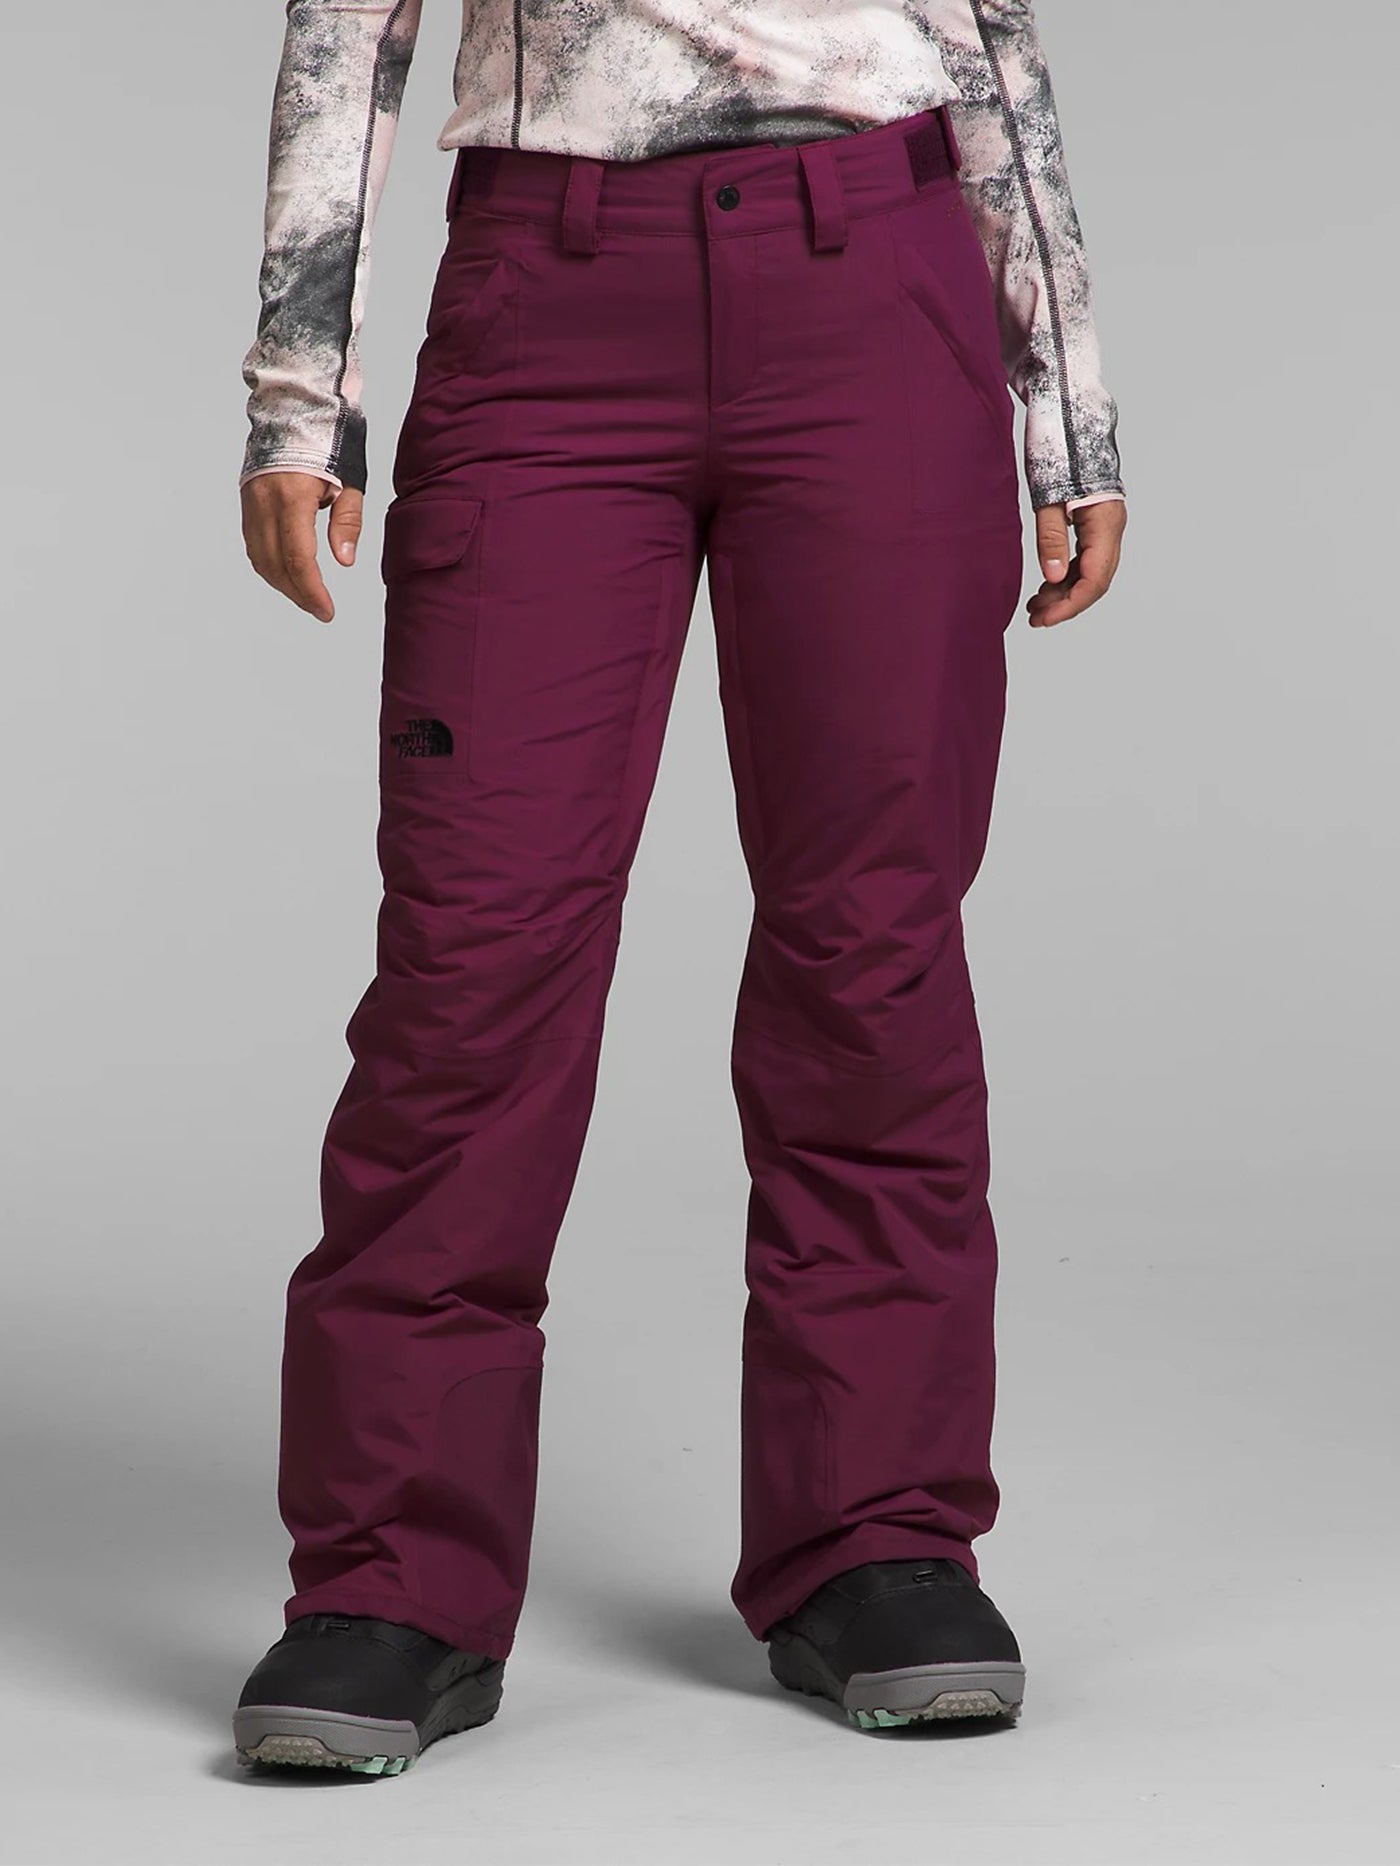 The North Face Womens Freedom Insulated Snow Pant in Misty Sage